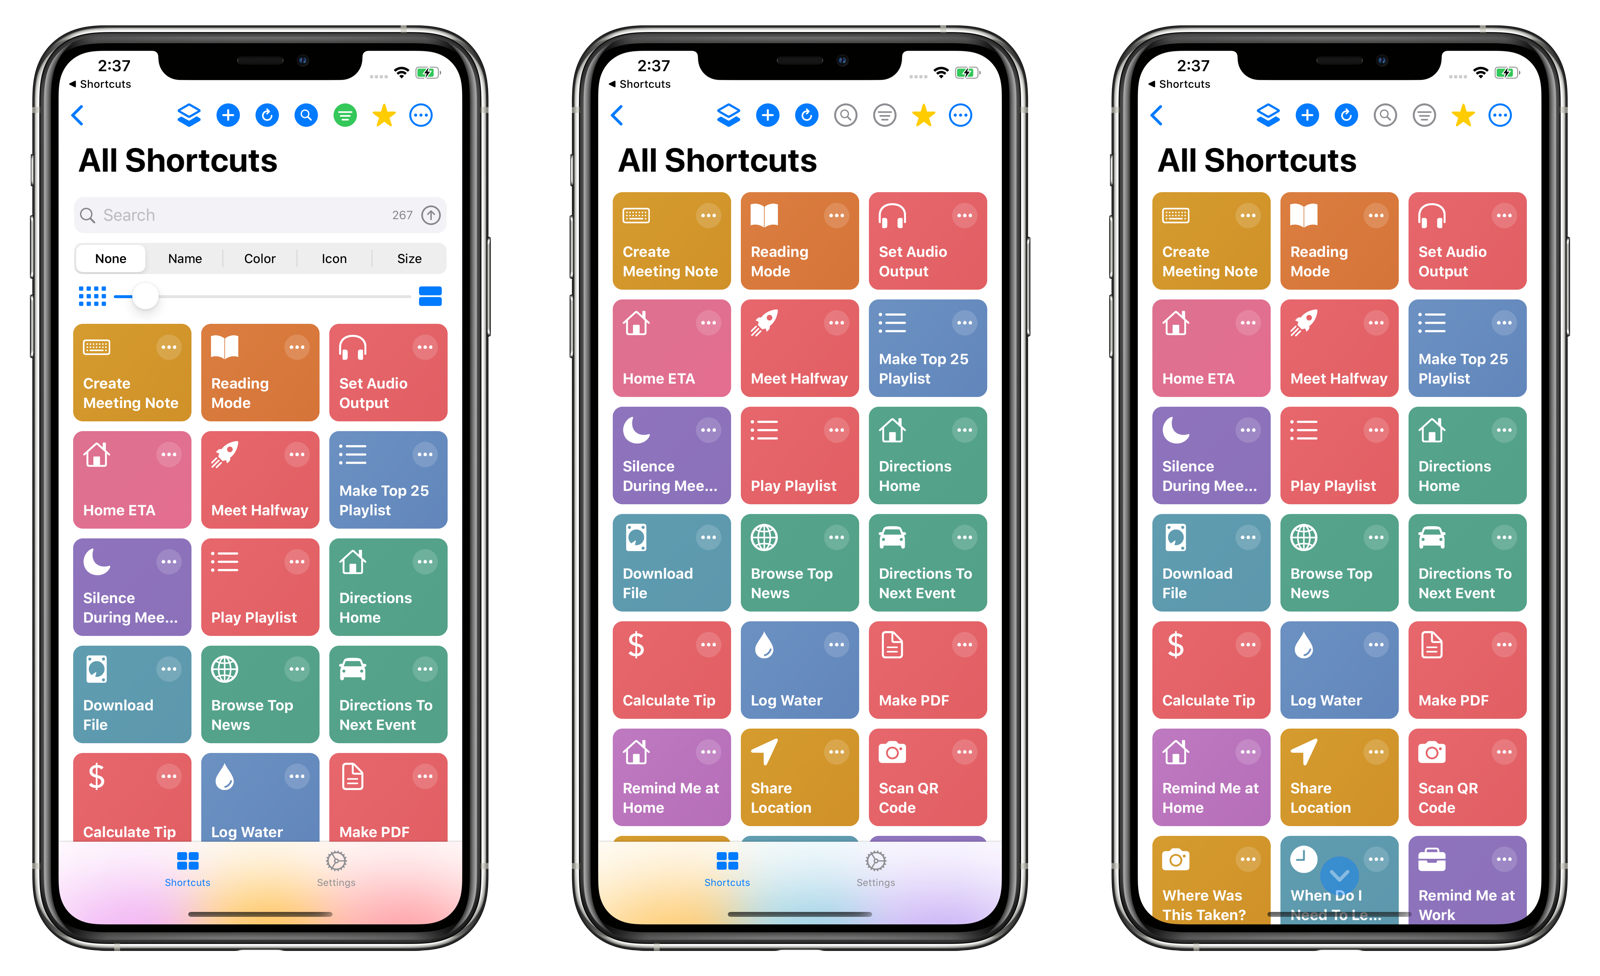 Maximizing screen real estate for the Shortcuts View